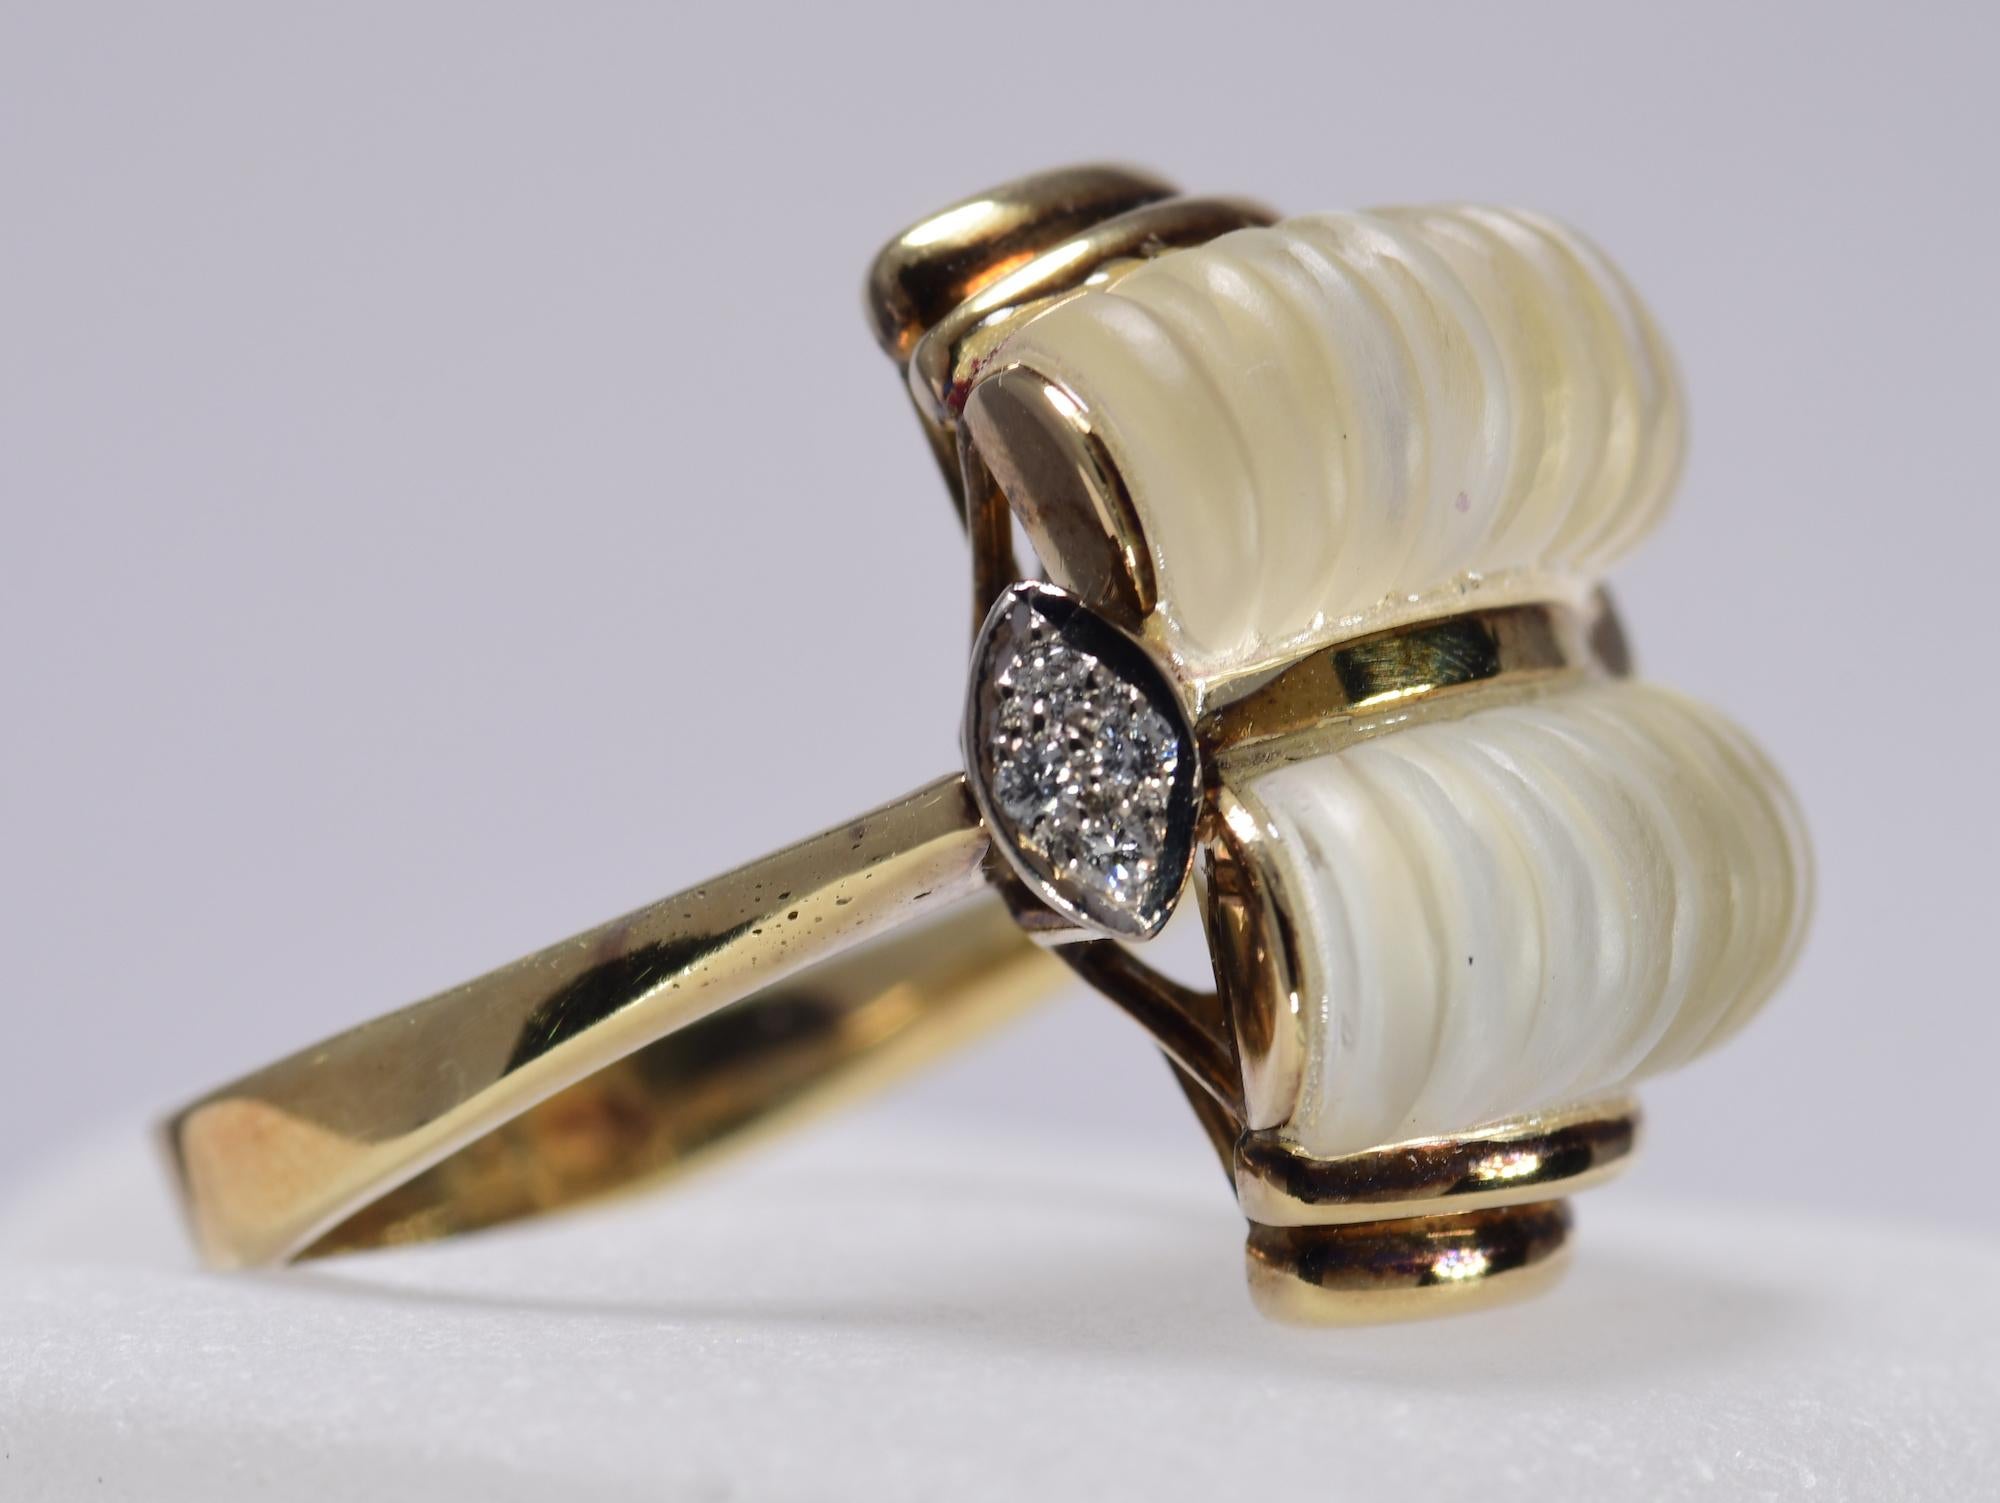 Vintage 1960's carved rock quartz ring with .12 carat total weight of diamonds. The ring is 14 karat yellow gold with a finger size of 9. Please inquire if additional sizing is needed. The ring weighs 12.2 grams and is in excellent condition.